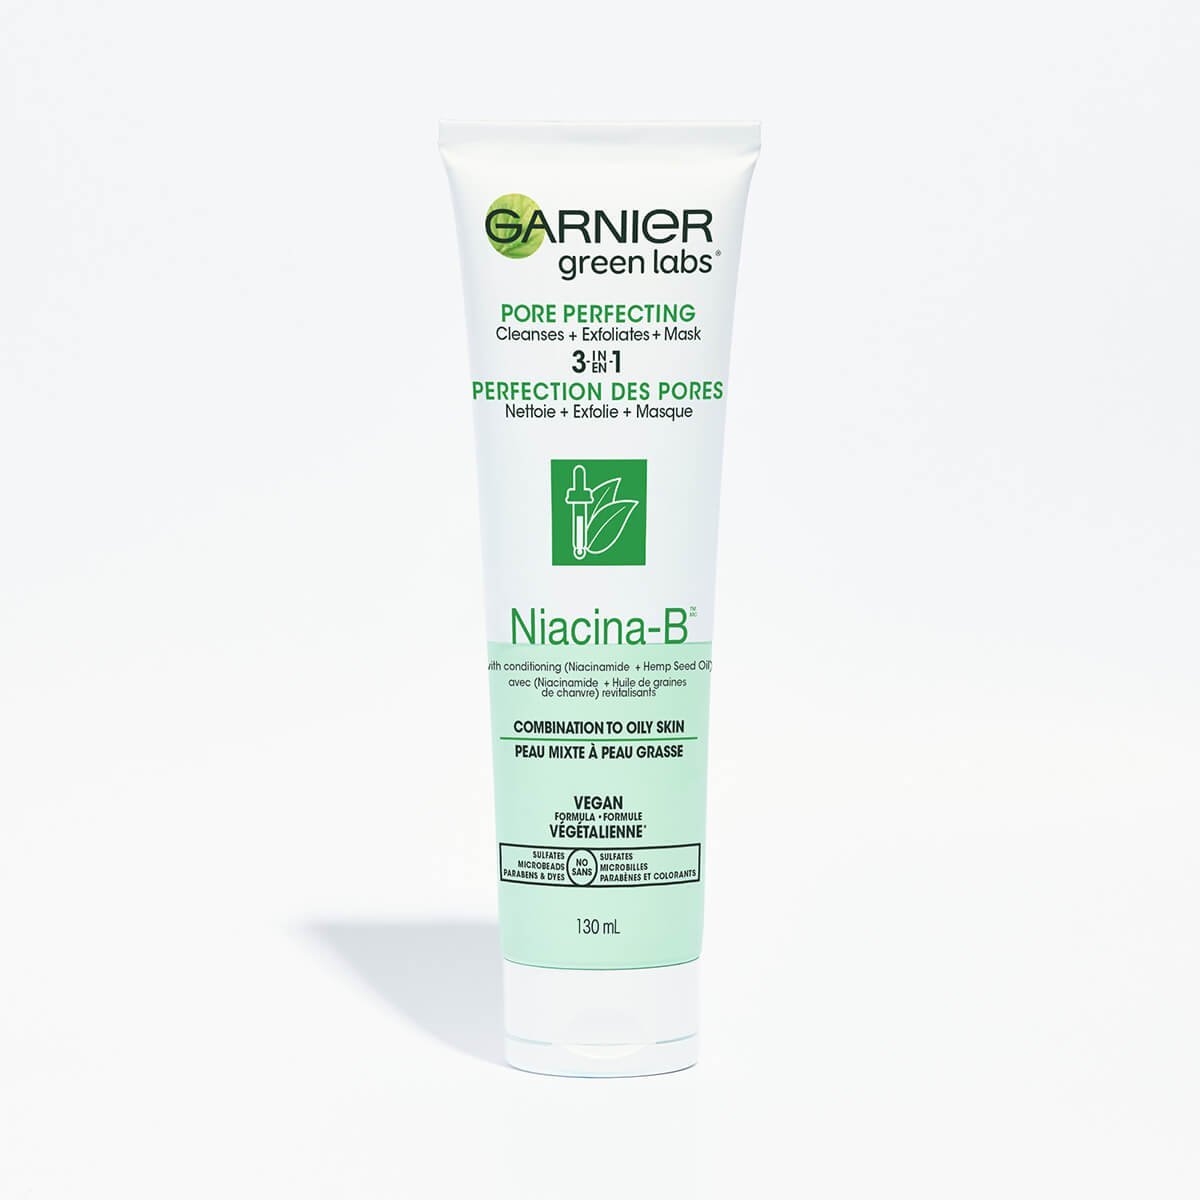 Green labs cleanser niacinamide IMAGE1